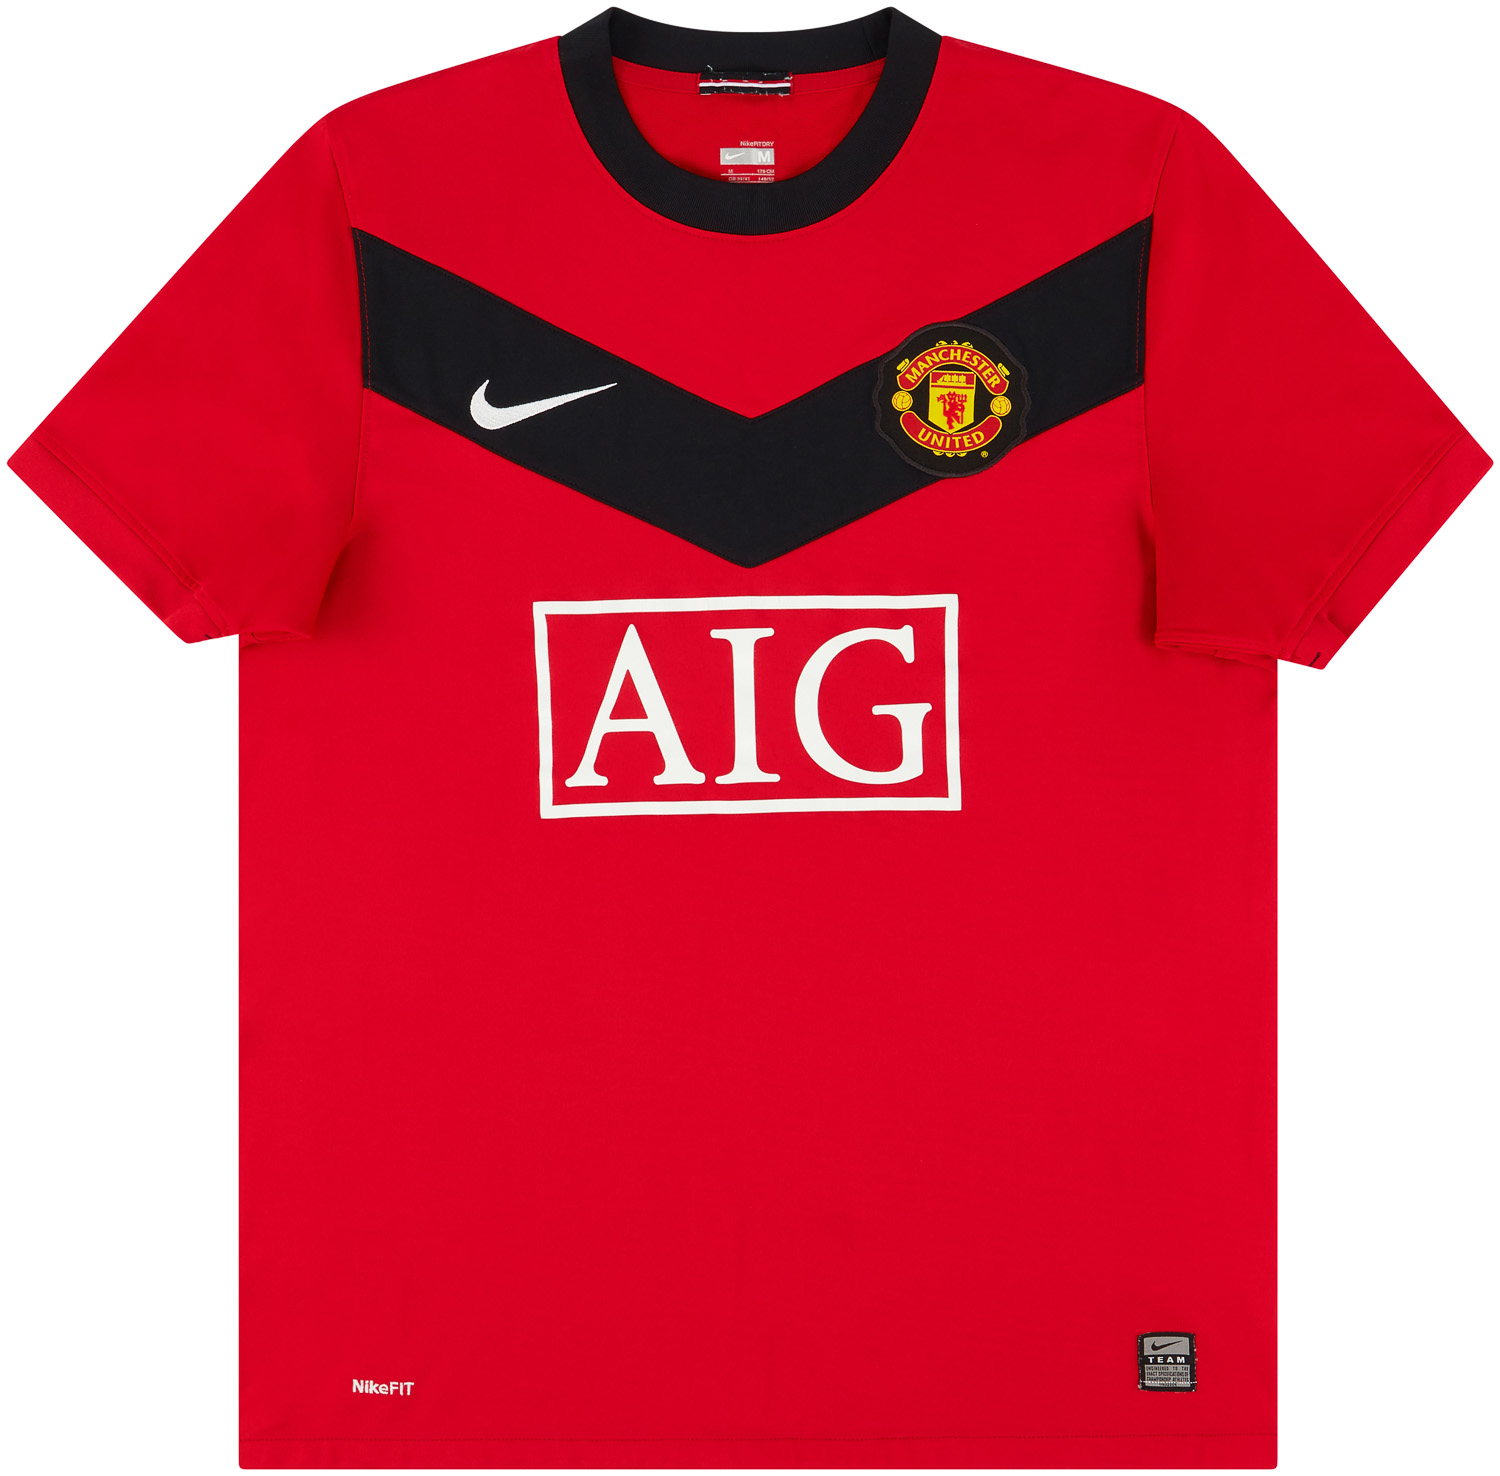 2009-10 Manchester United Home Shirt - 9/10 -